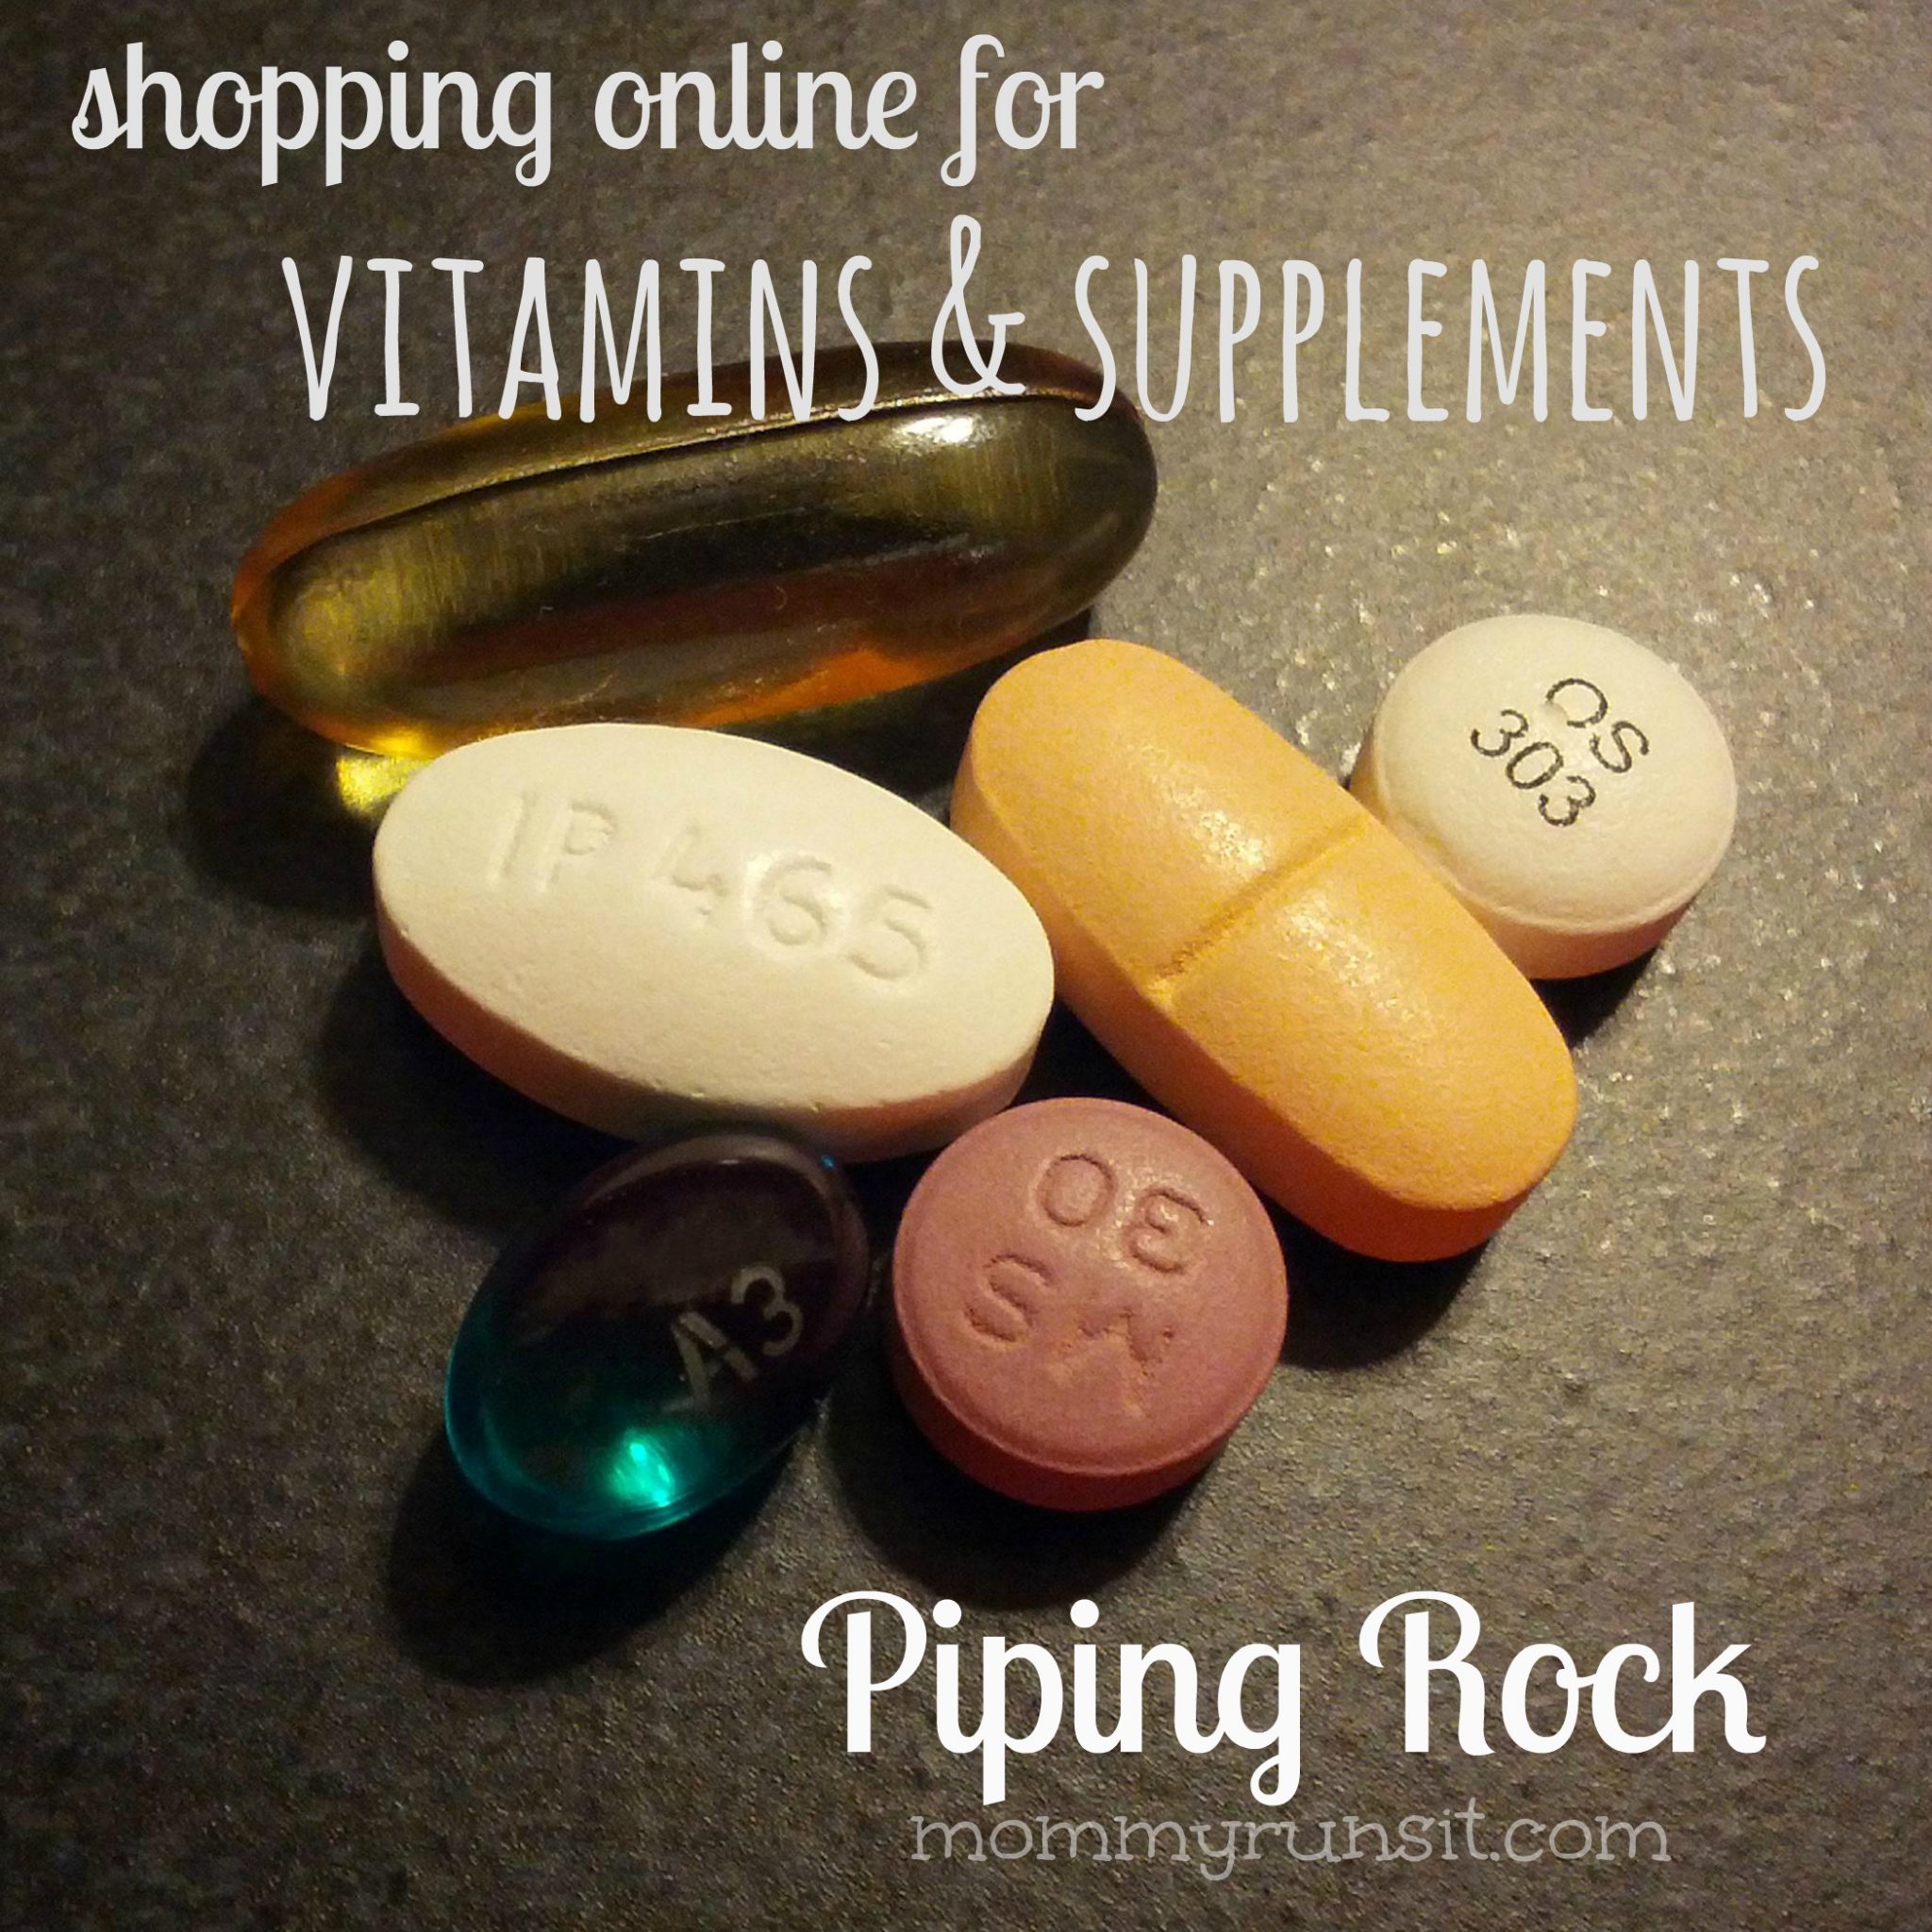 Piping Rock Vitamins Review - One-Stop Online Shopping for Vitamins | Mommy Runs It #ad